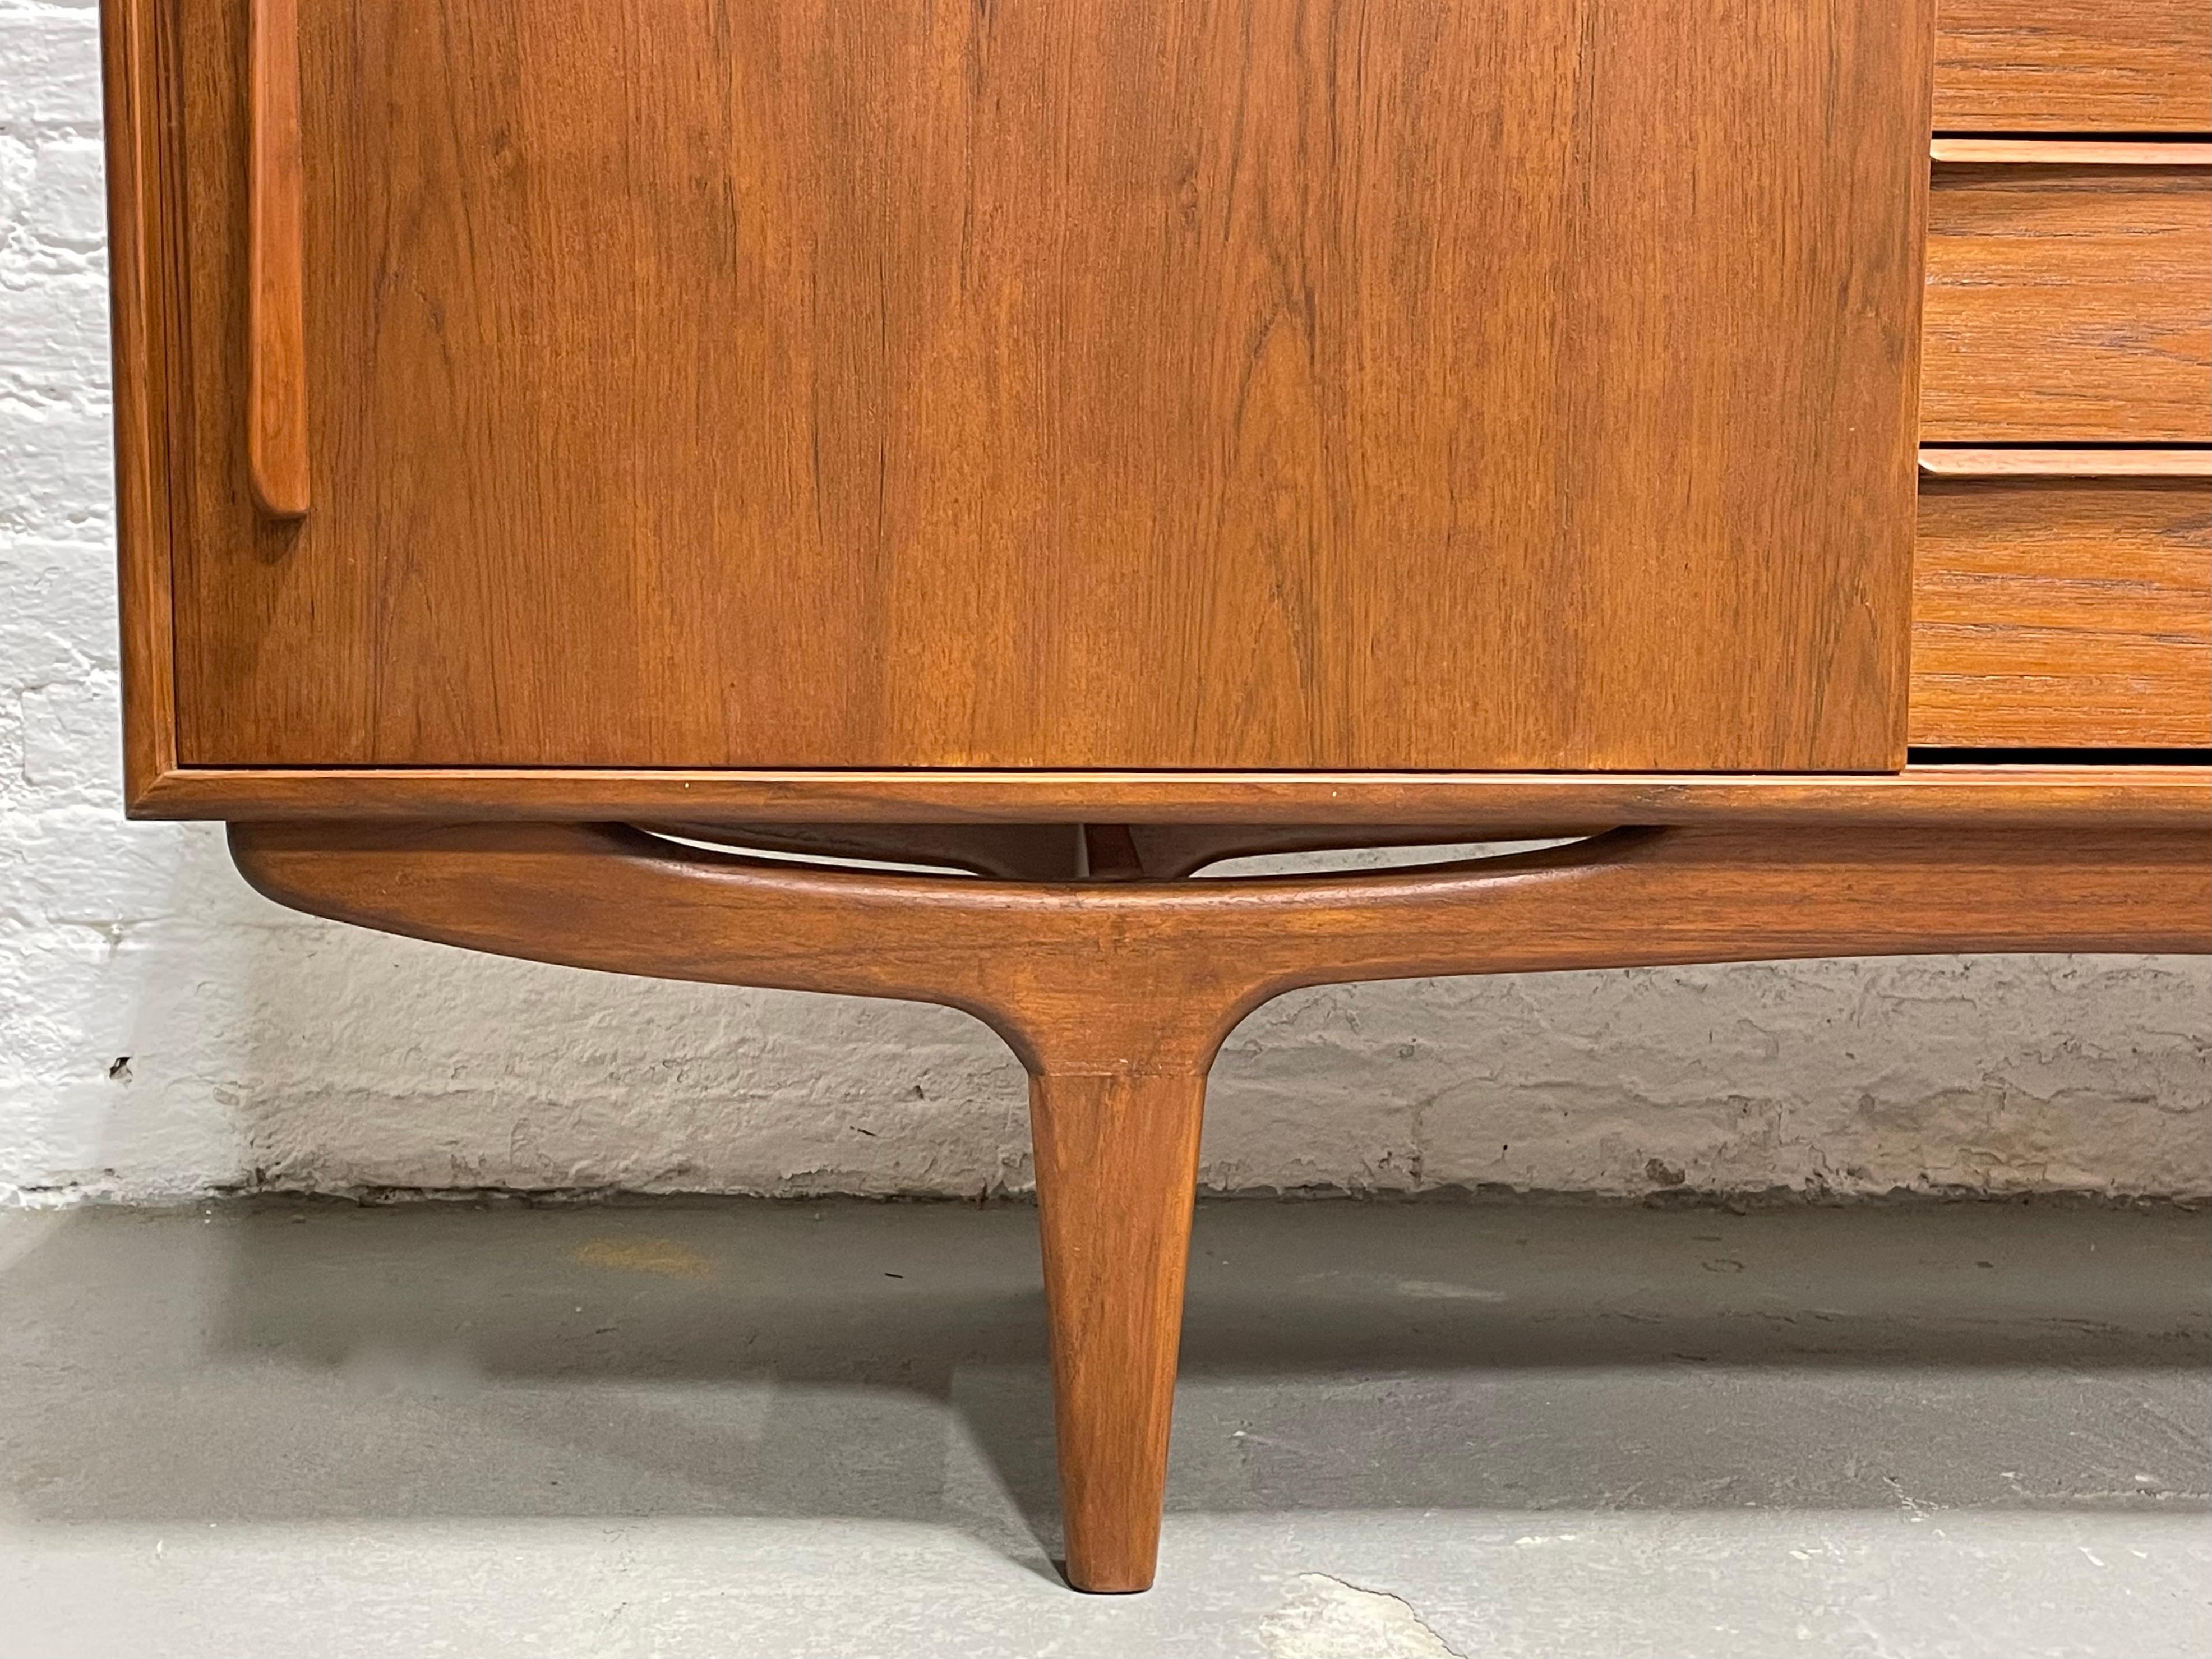 Reclaimed Wood Long Sculpted Mid-Century Modern Styled Danish Teak Credenza For Sale